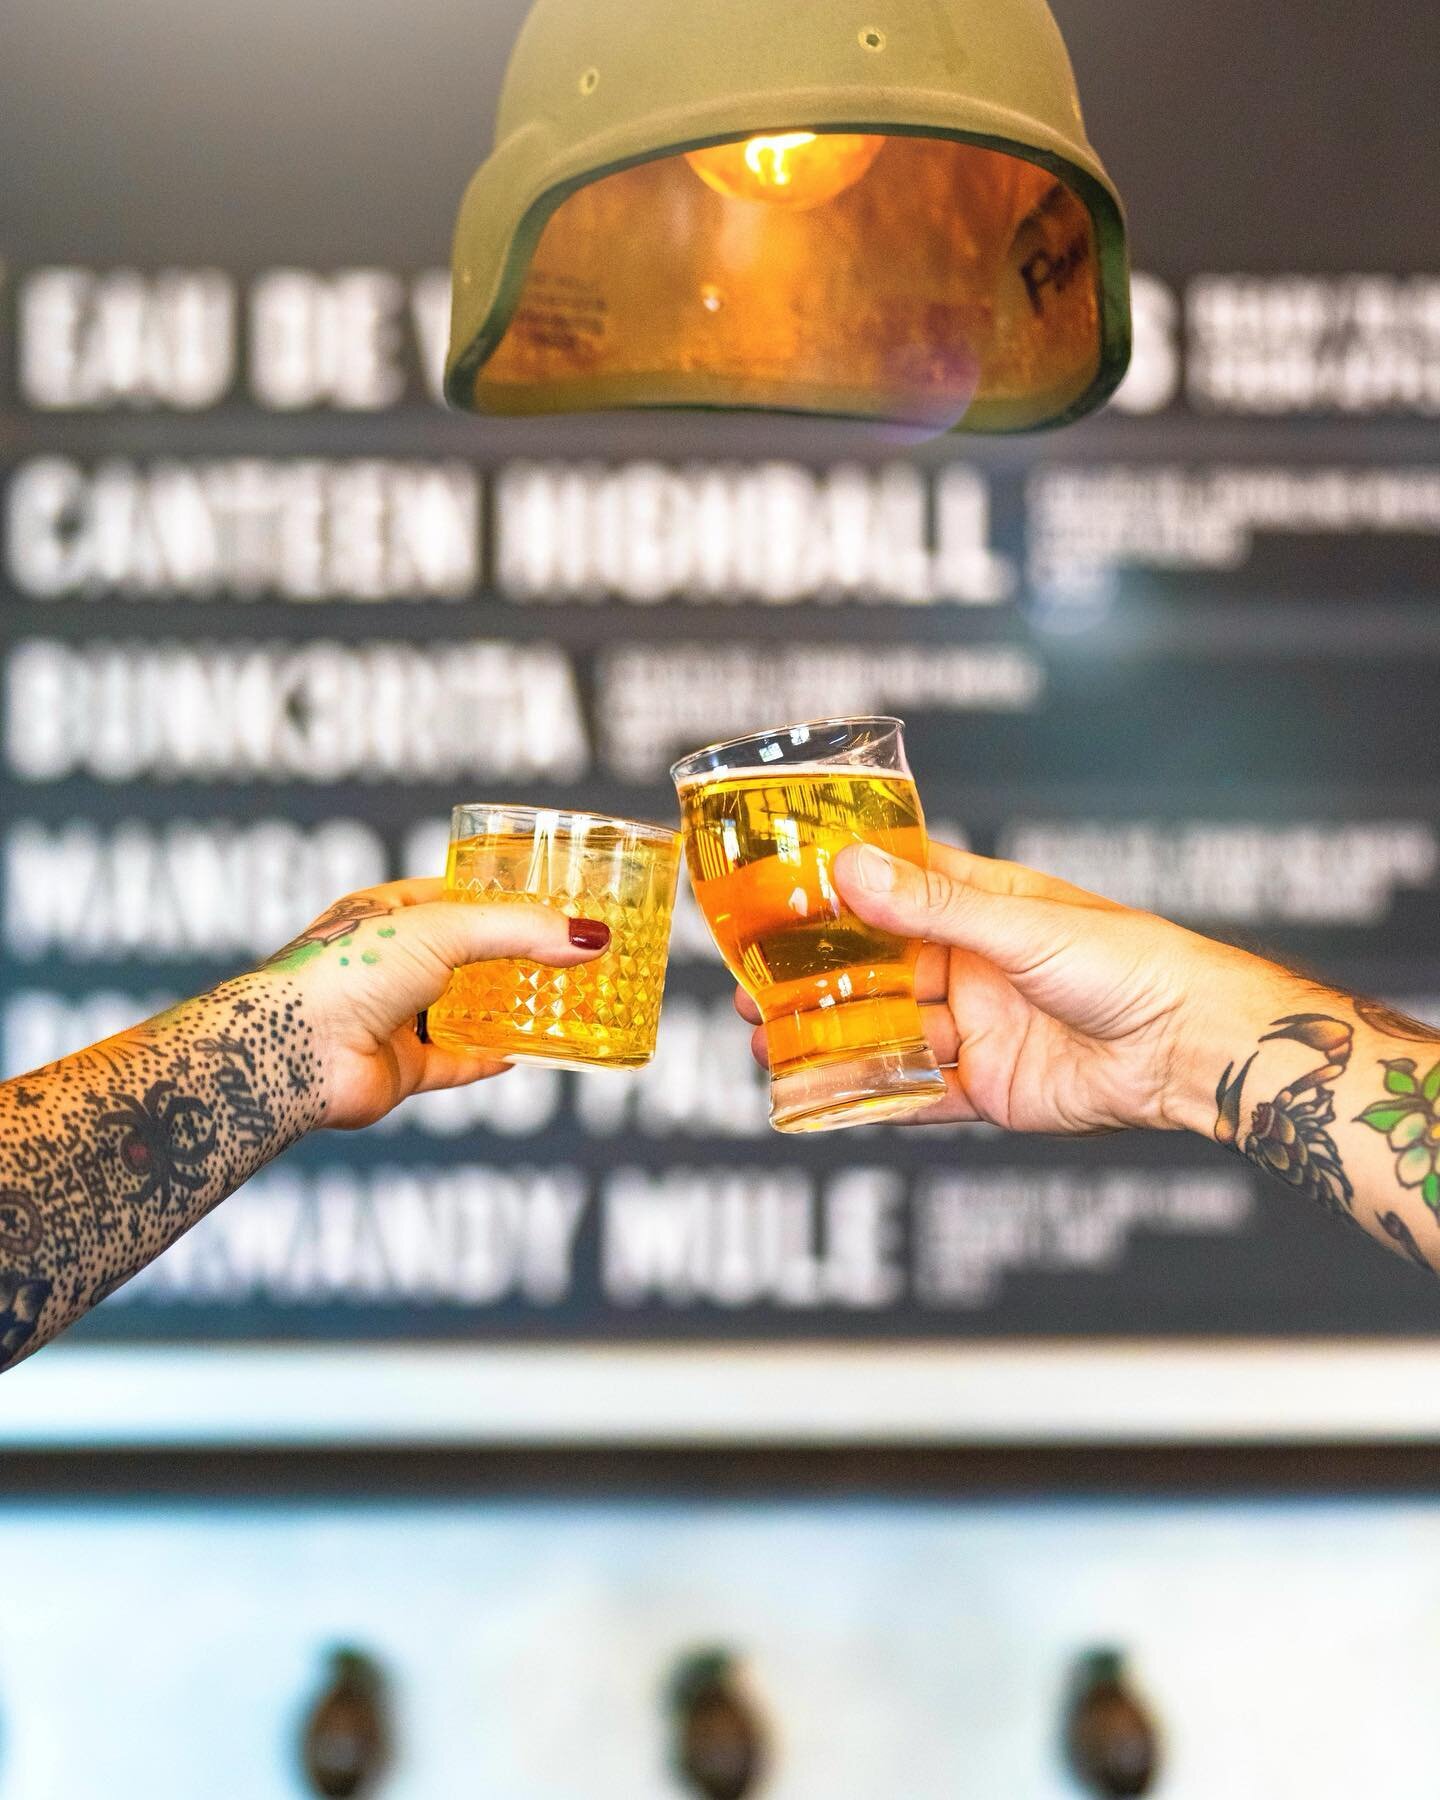 🪖 ARMED FORCES DAY 🪖

It&rsquo;s #armedforcesday and we&rsquo;re raising a glass to honor the sacrifice of all the men and women currently serving our country around the world.

Drink Great Cider. Honor Great Sacrifice.

HOURS
Monday: 11am-10pm
Tue